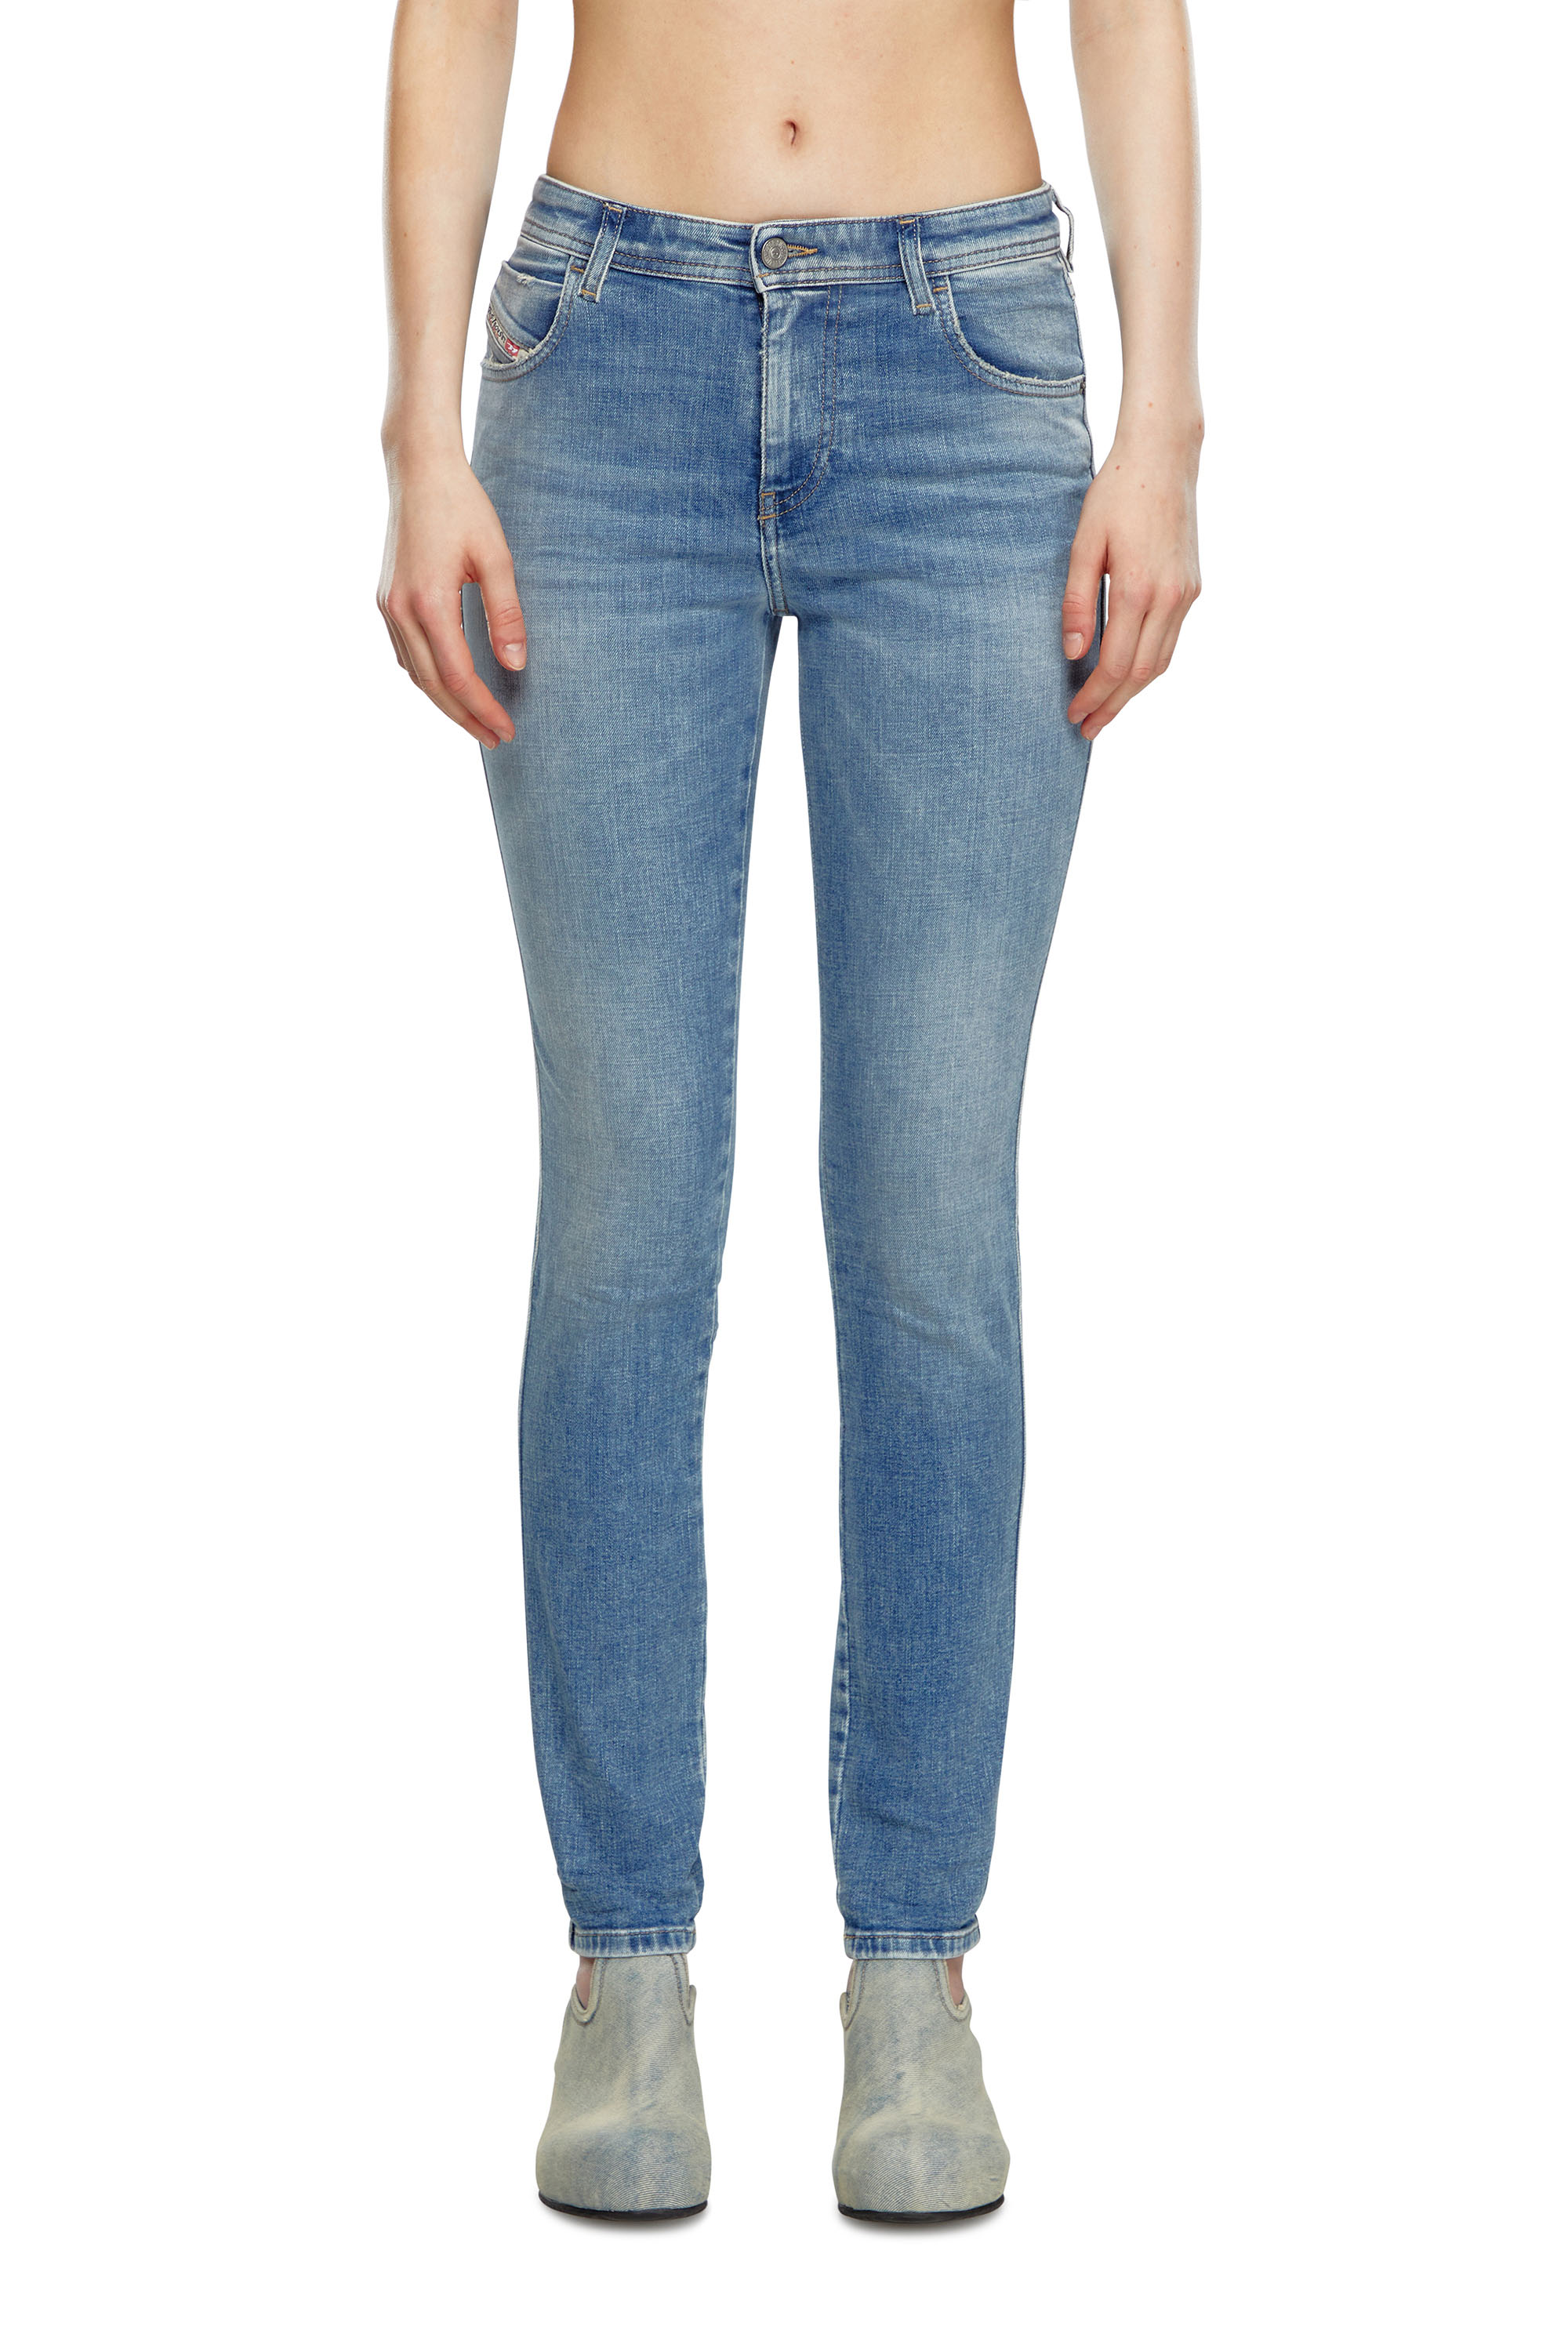 Womens Skinny Jeans | Go with the swipe on Diesel.com